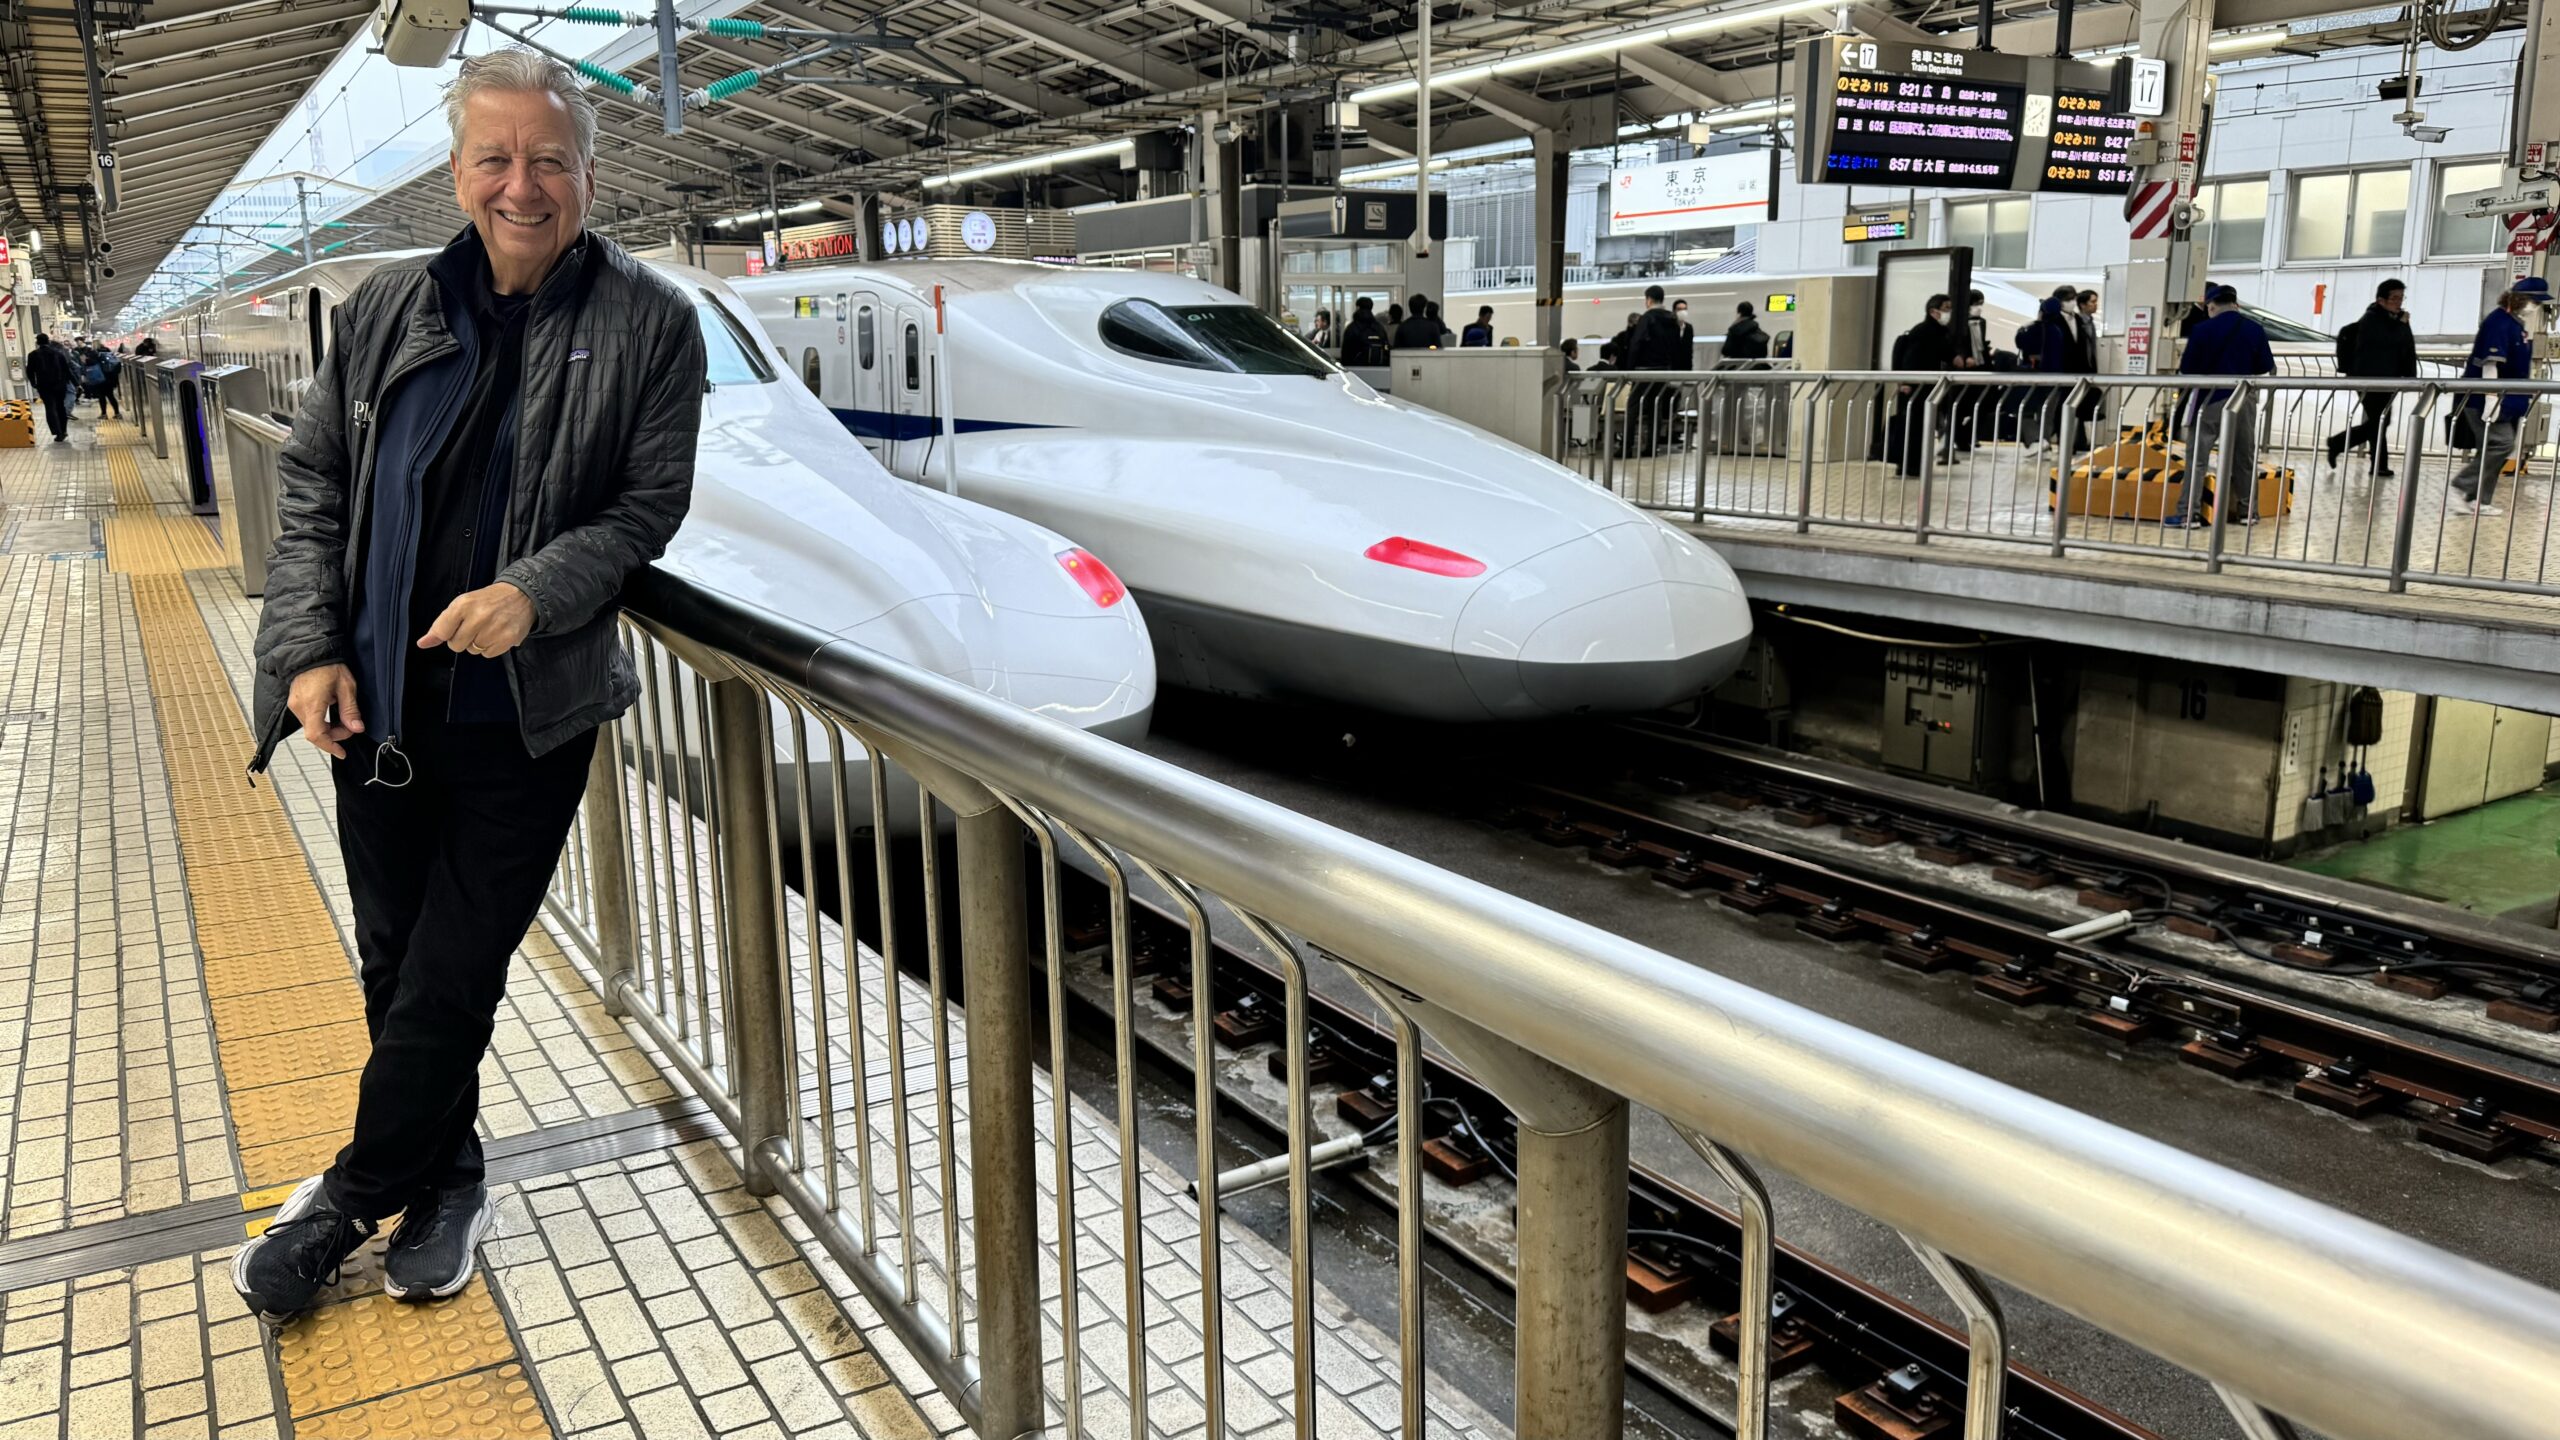 Eric Rhoads and the bullet trains